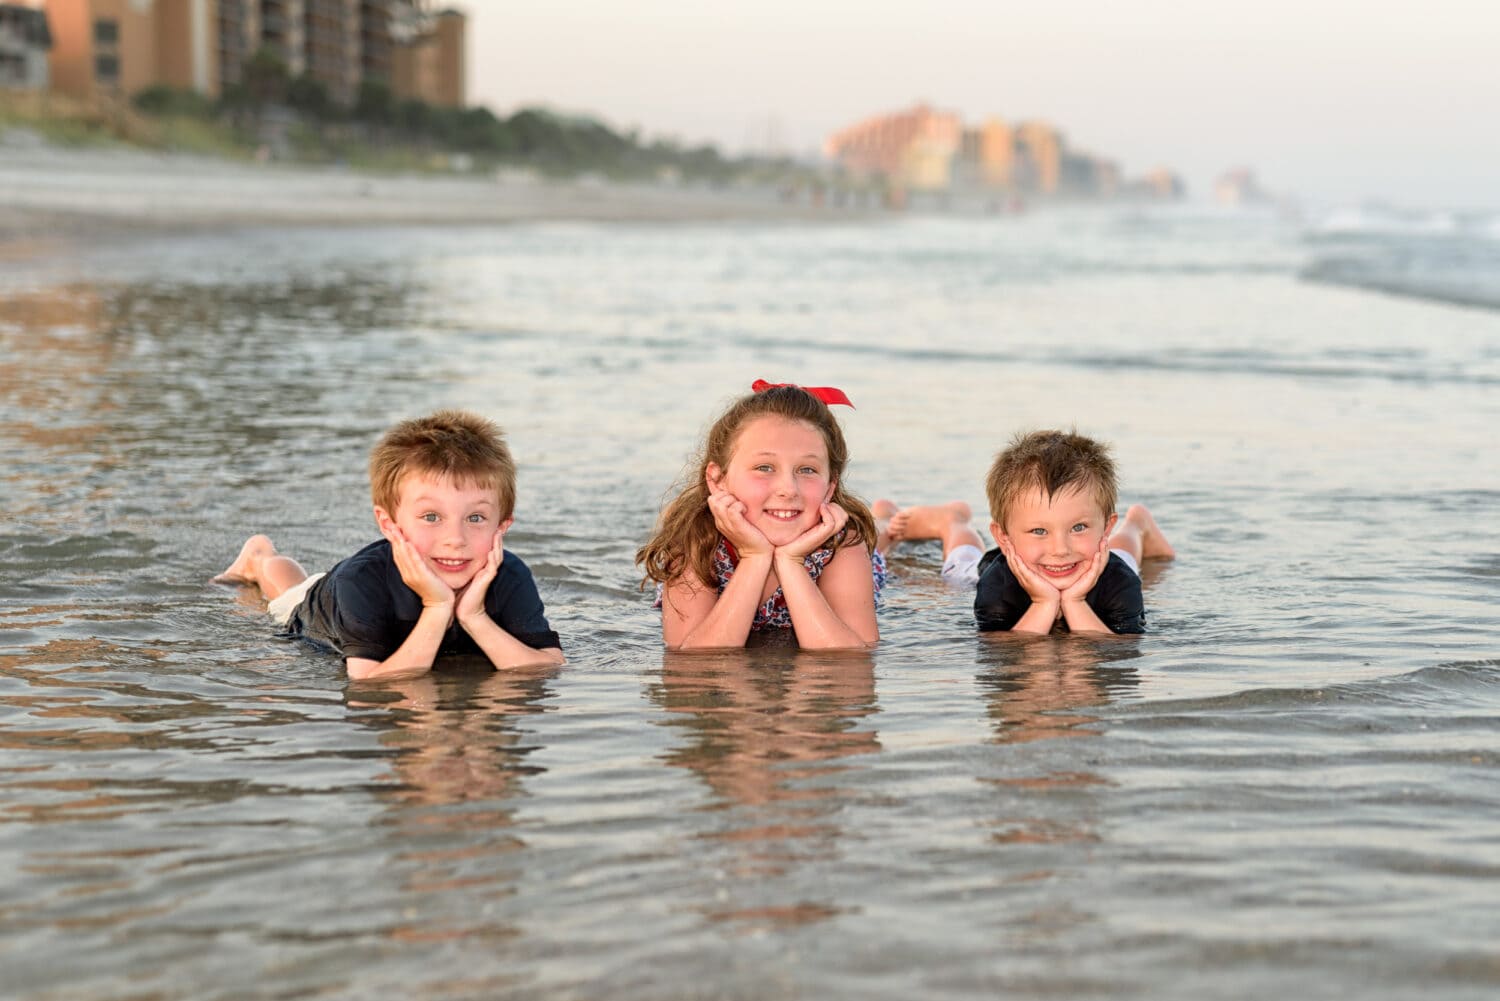 If they are already soaked you might as well get some fun pictures - North Myrtle Beach